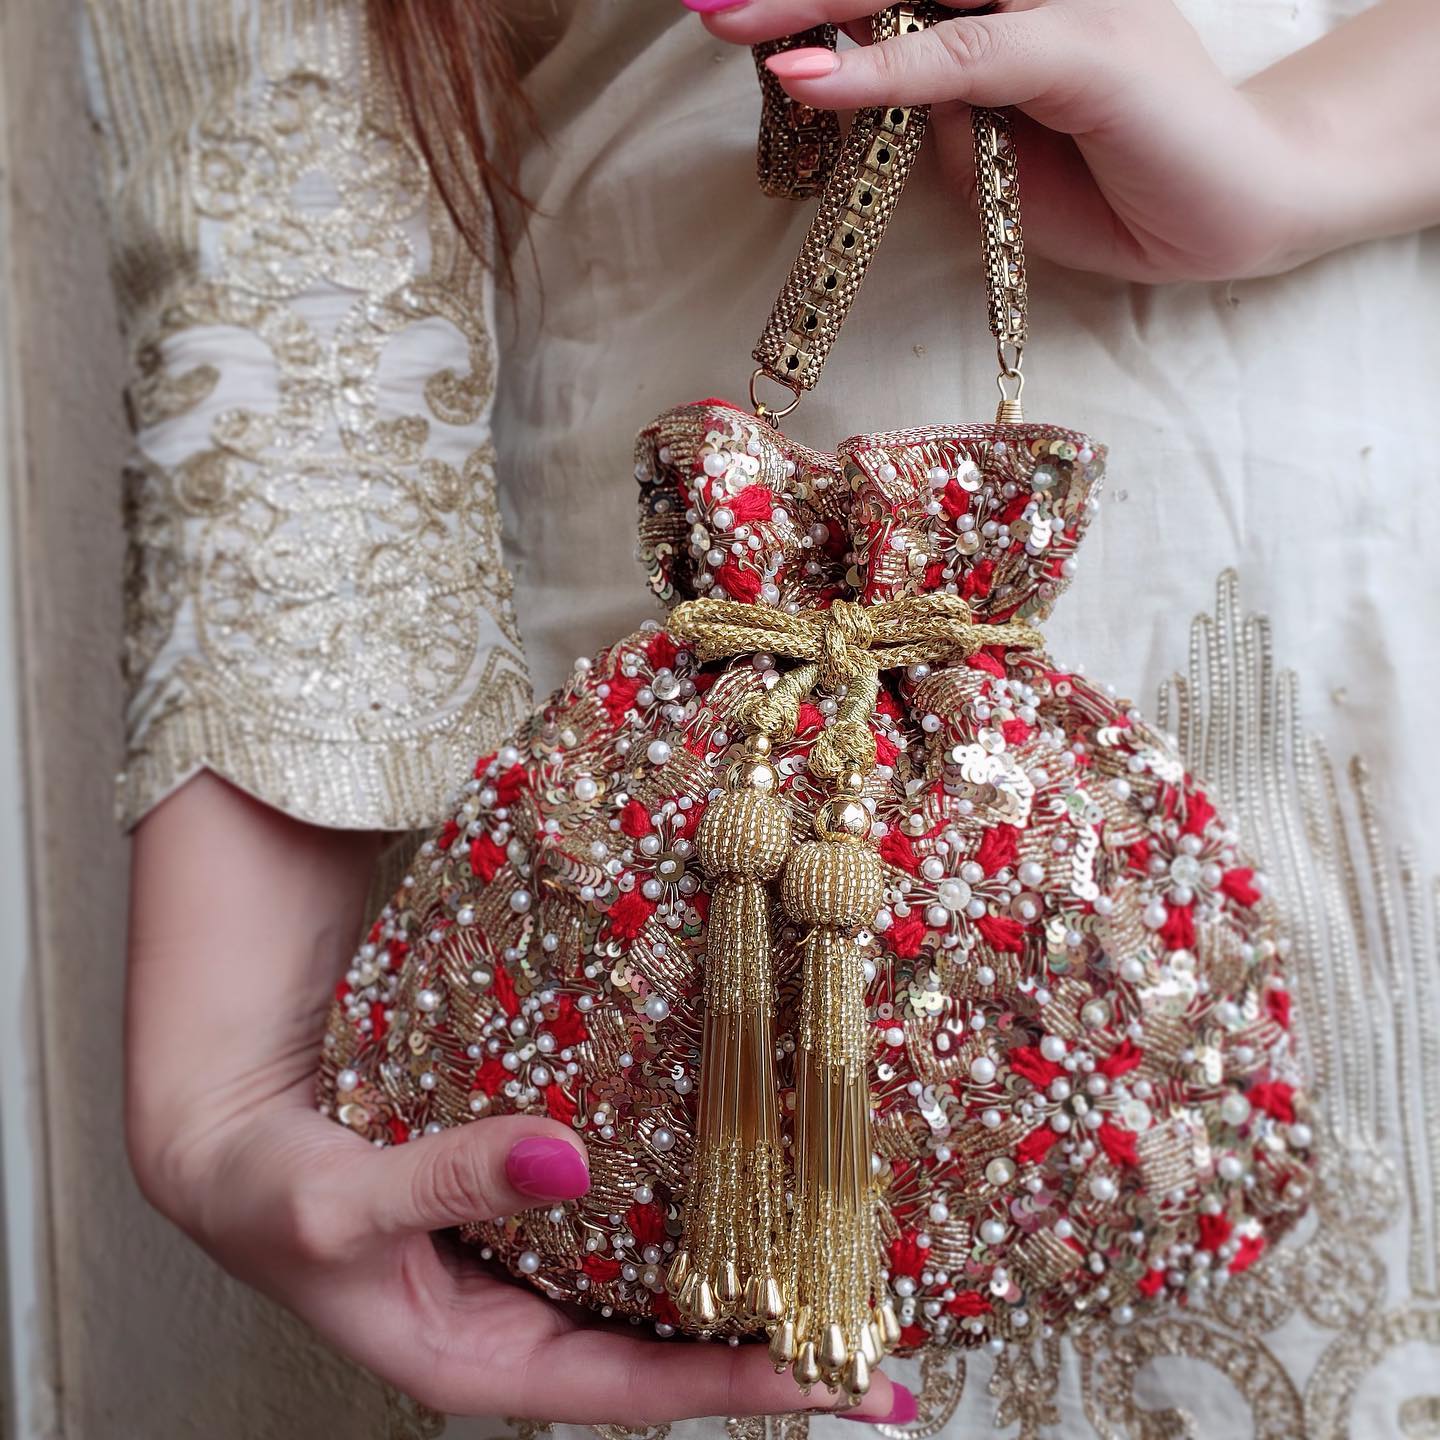 Latest Bridal Purses To Match Your Wedding Outfits